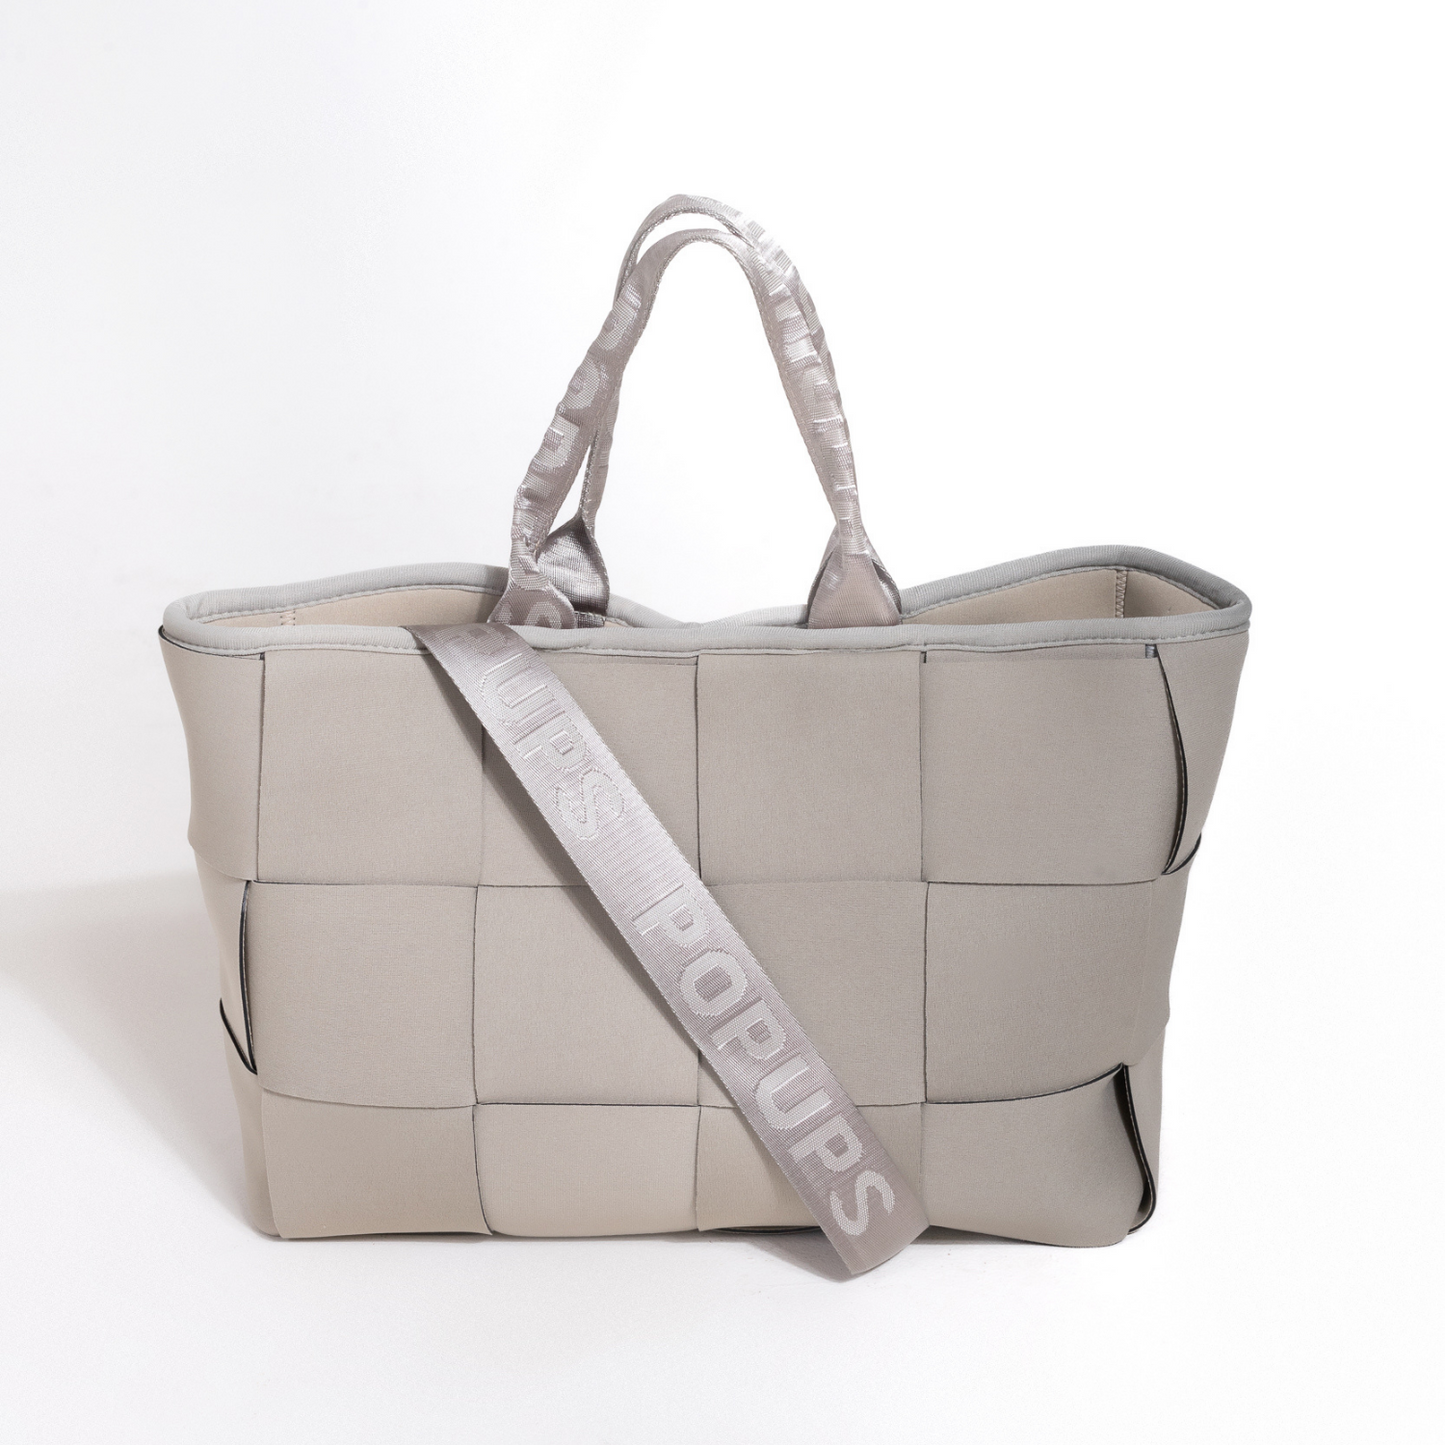 POUCH + ICON TOTE - TAUPE